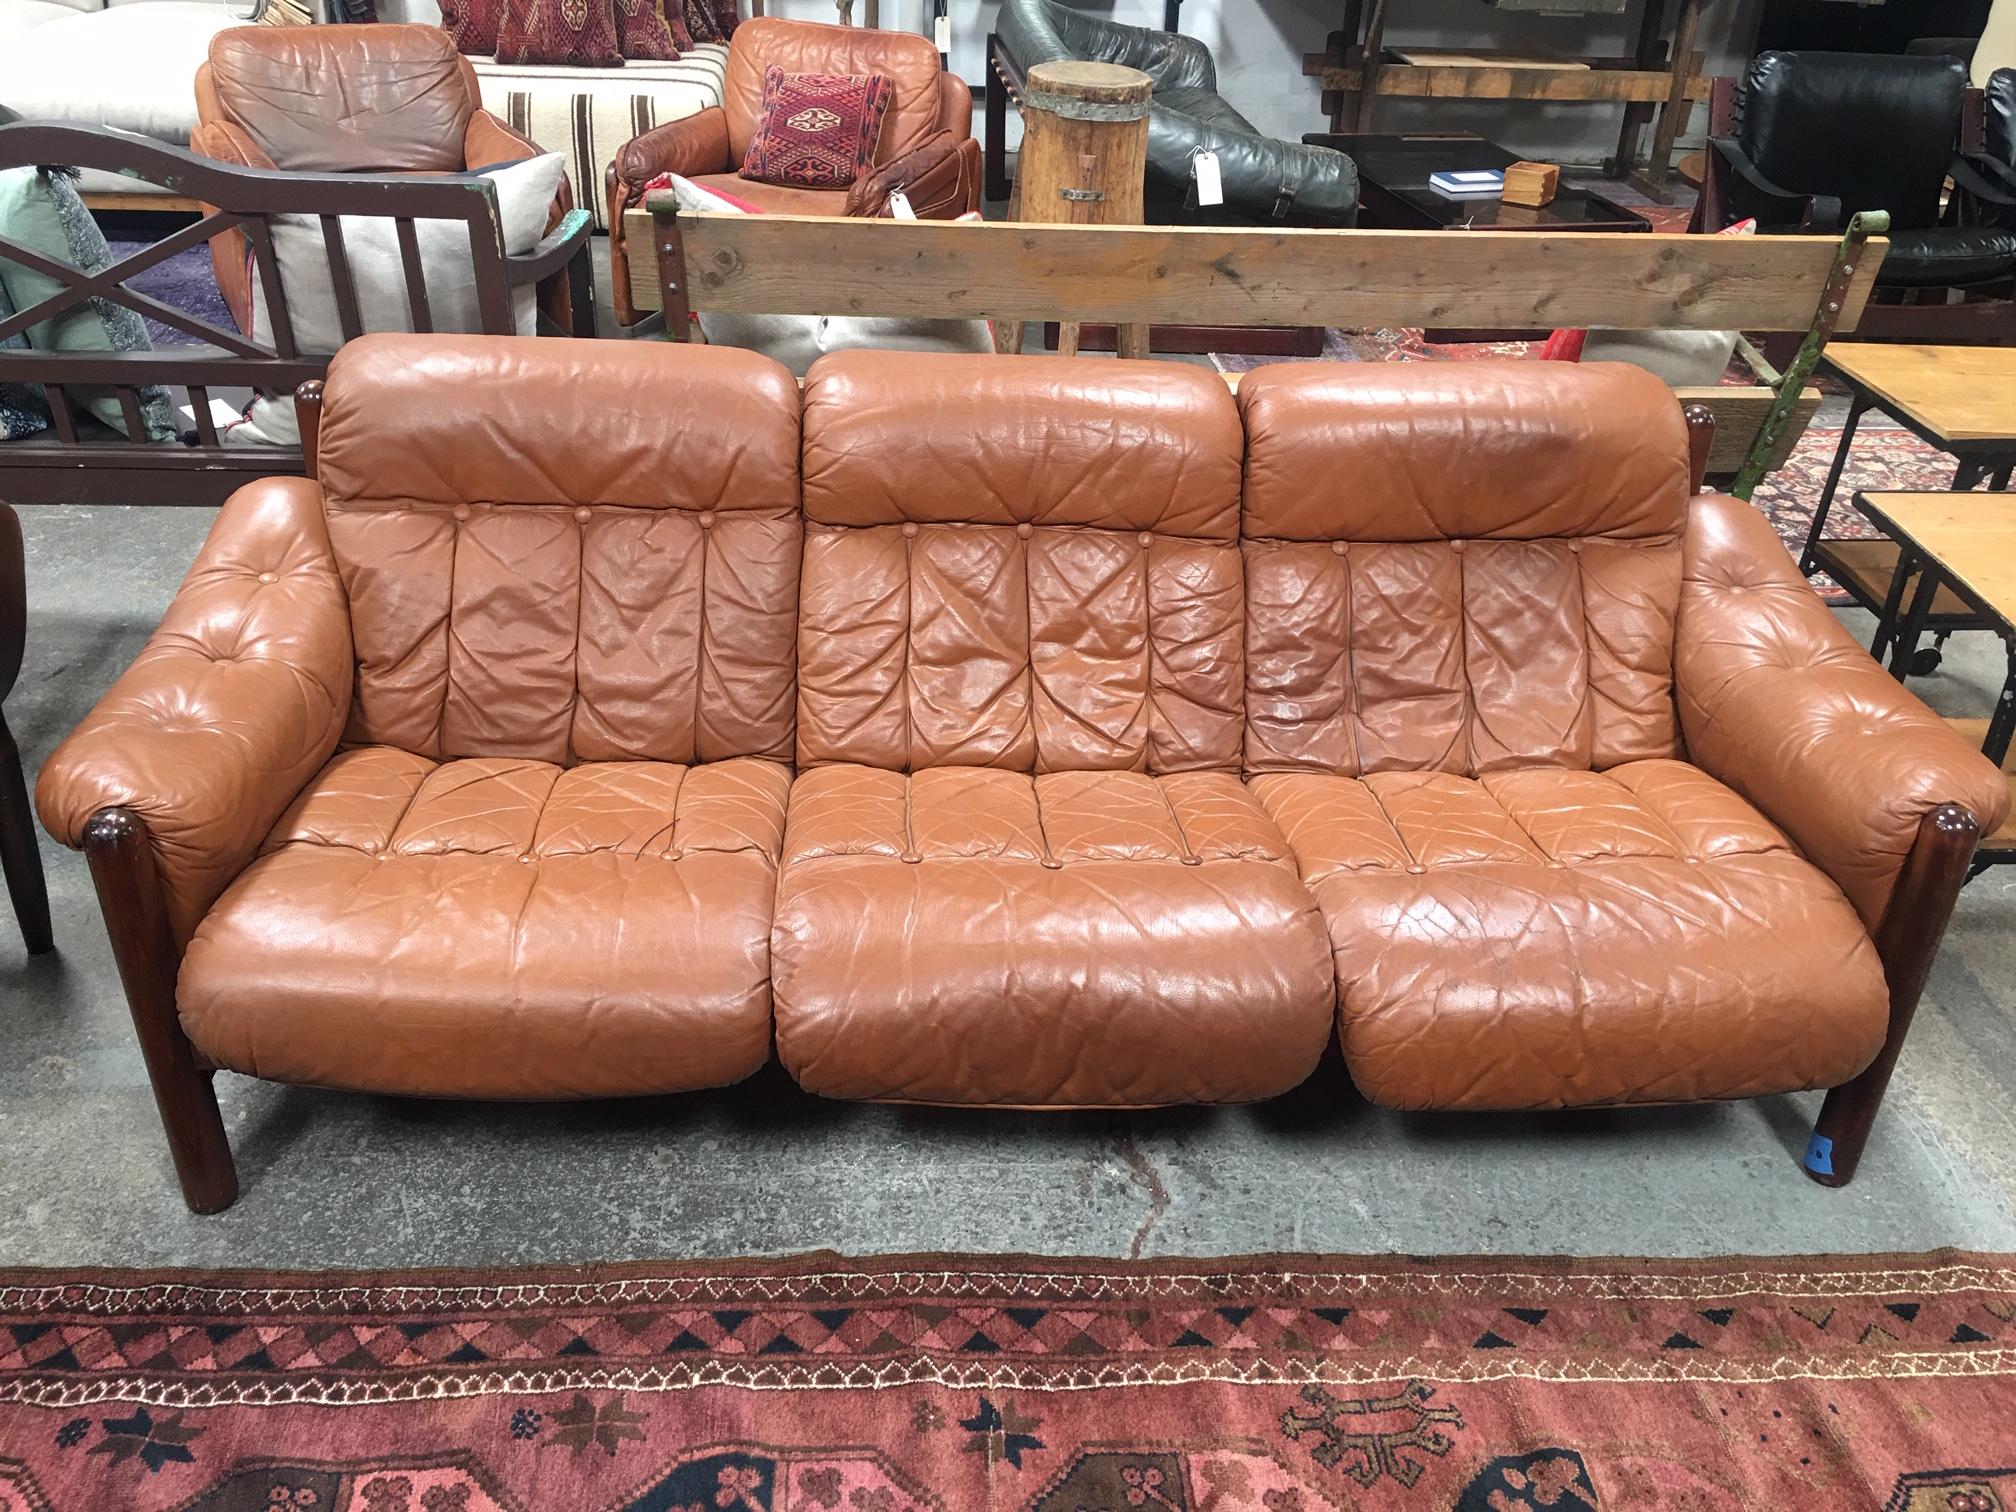 Vintage Percival Lafer sofa in a tufted cognac leather.